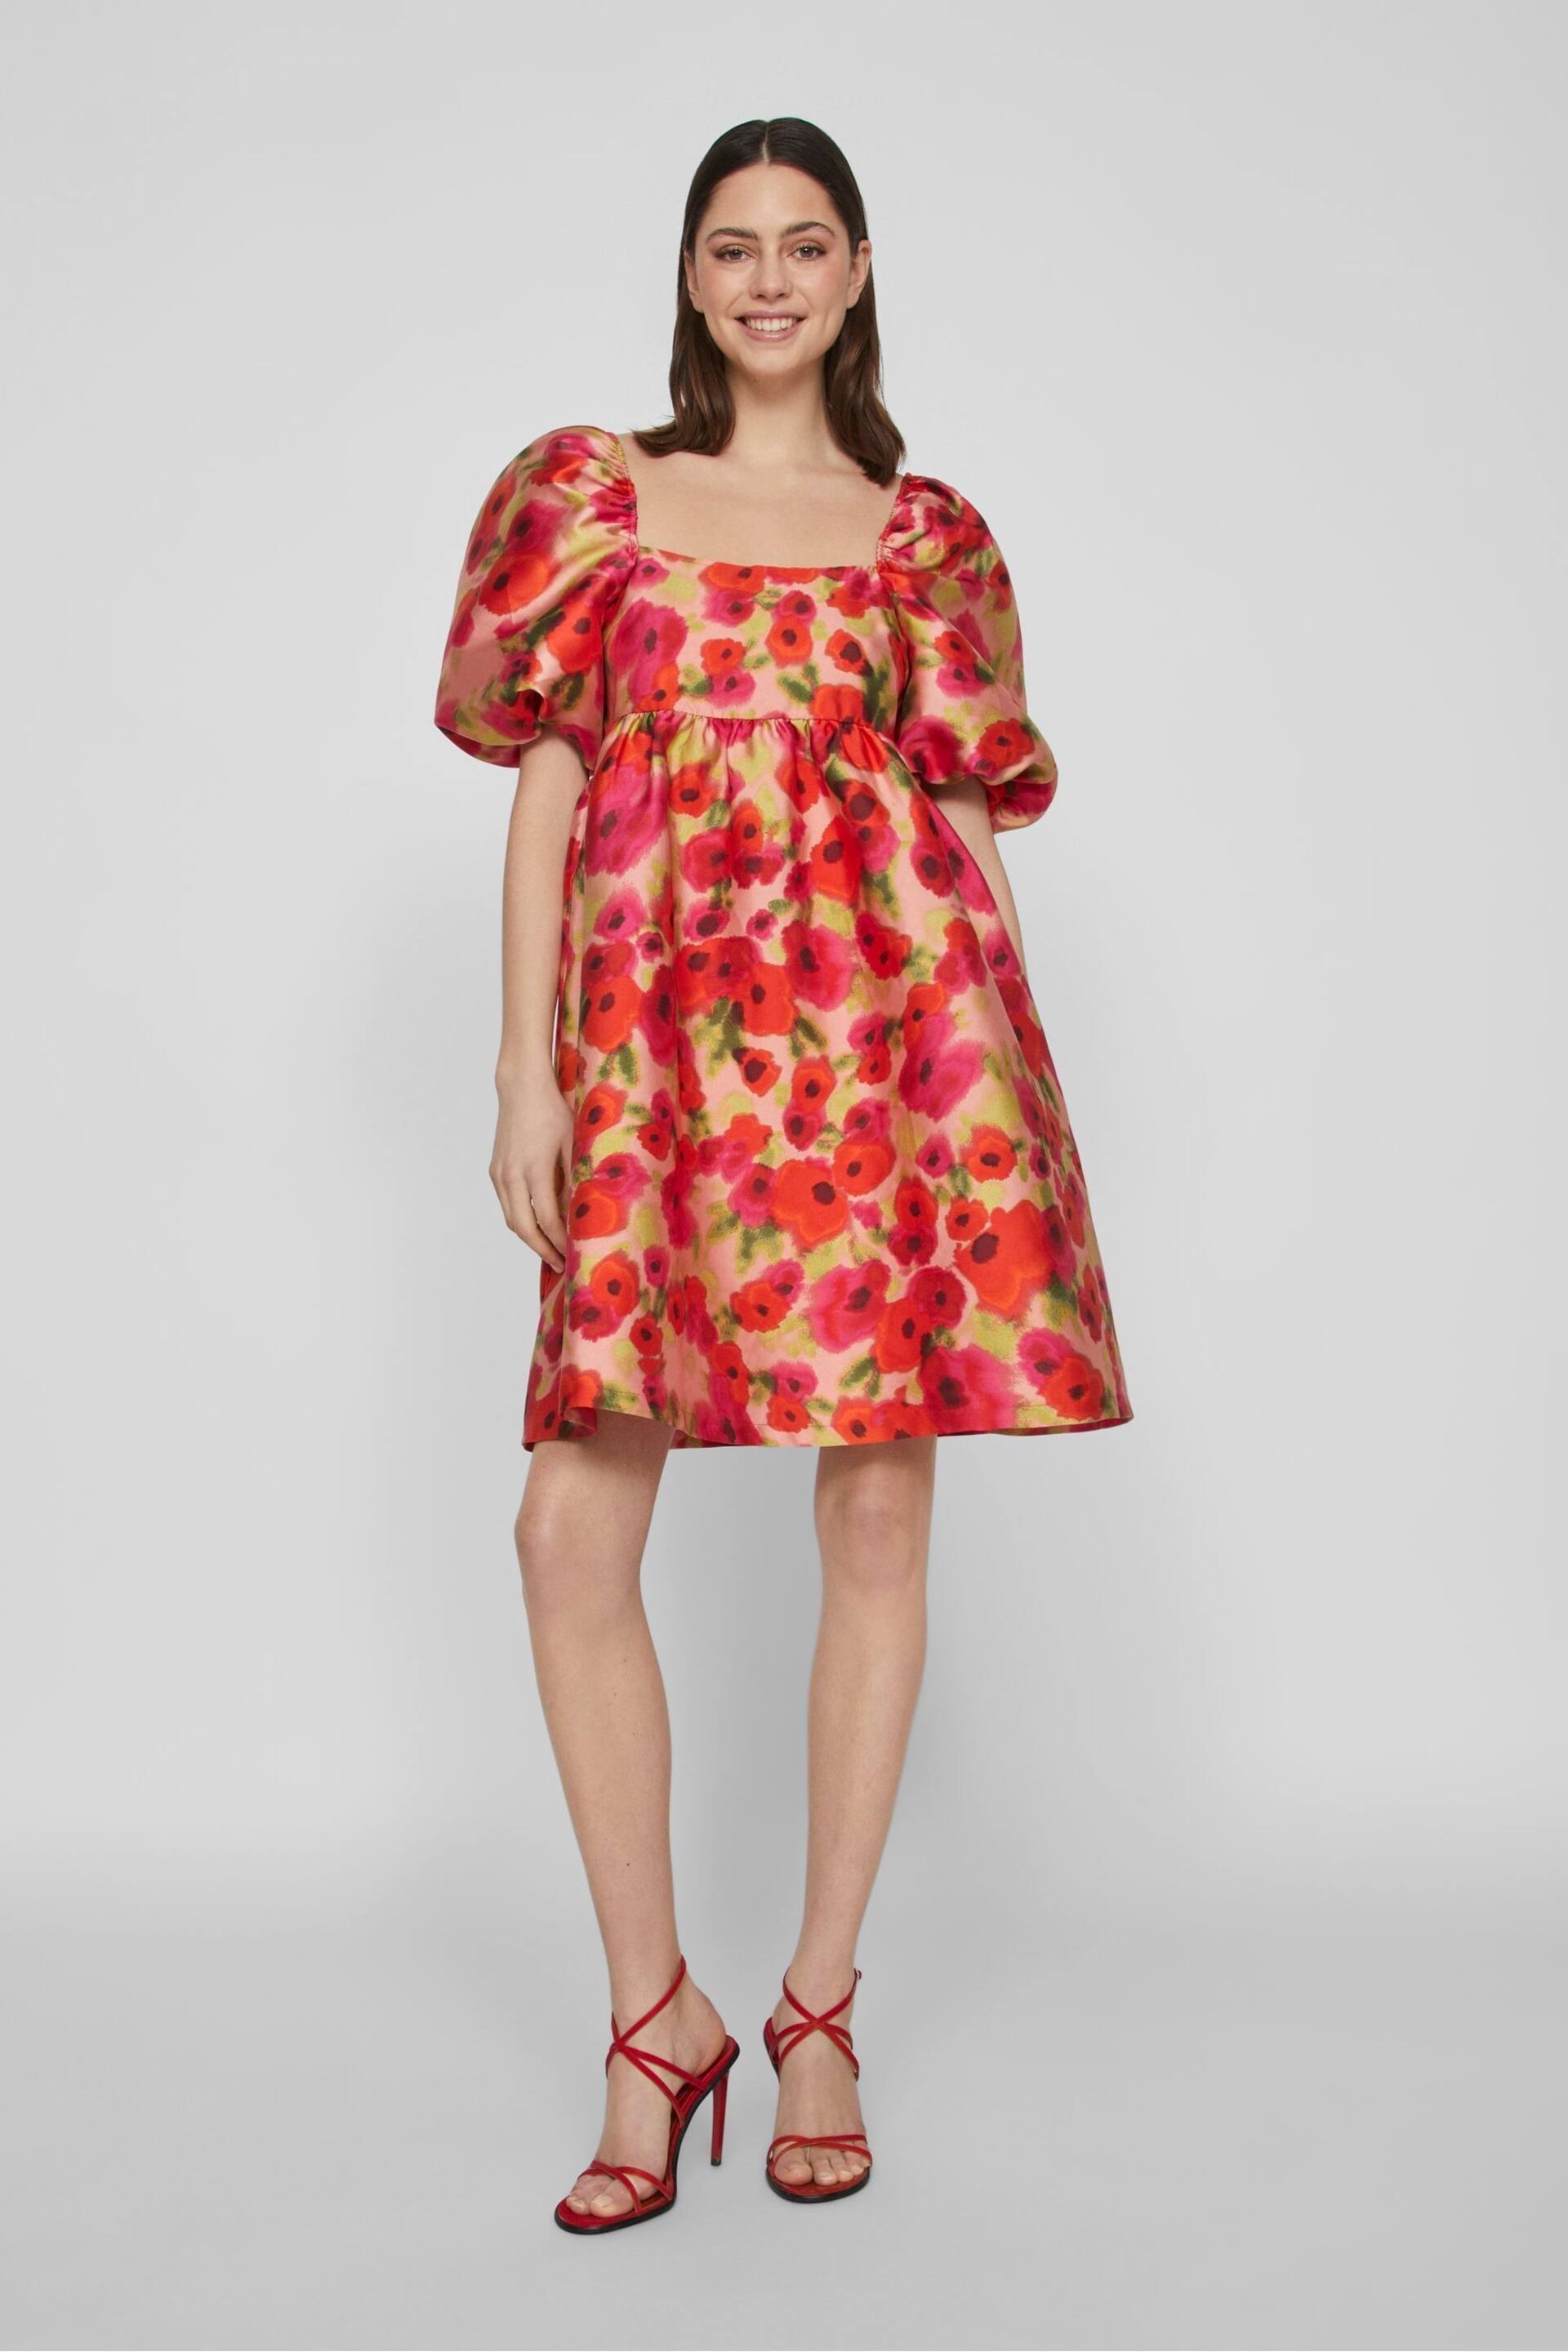 VILA Red Floral Baroque Puff Sleeve Mini Occasion Dress - Image 1 of 7